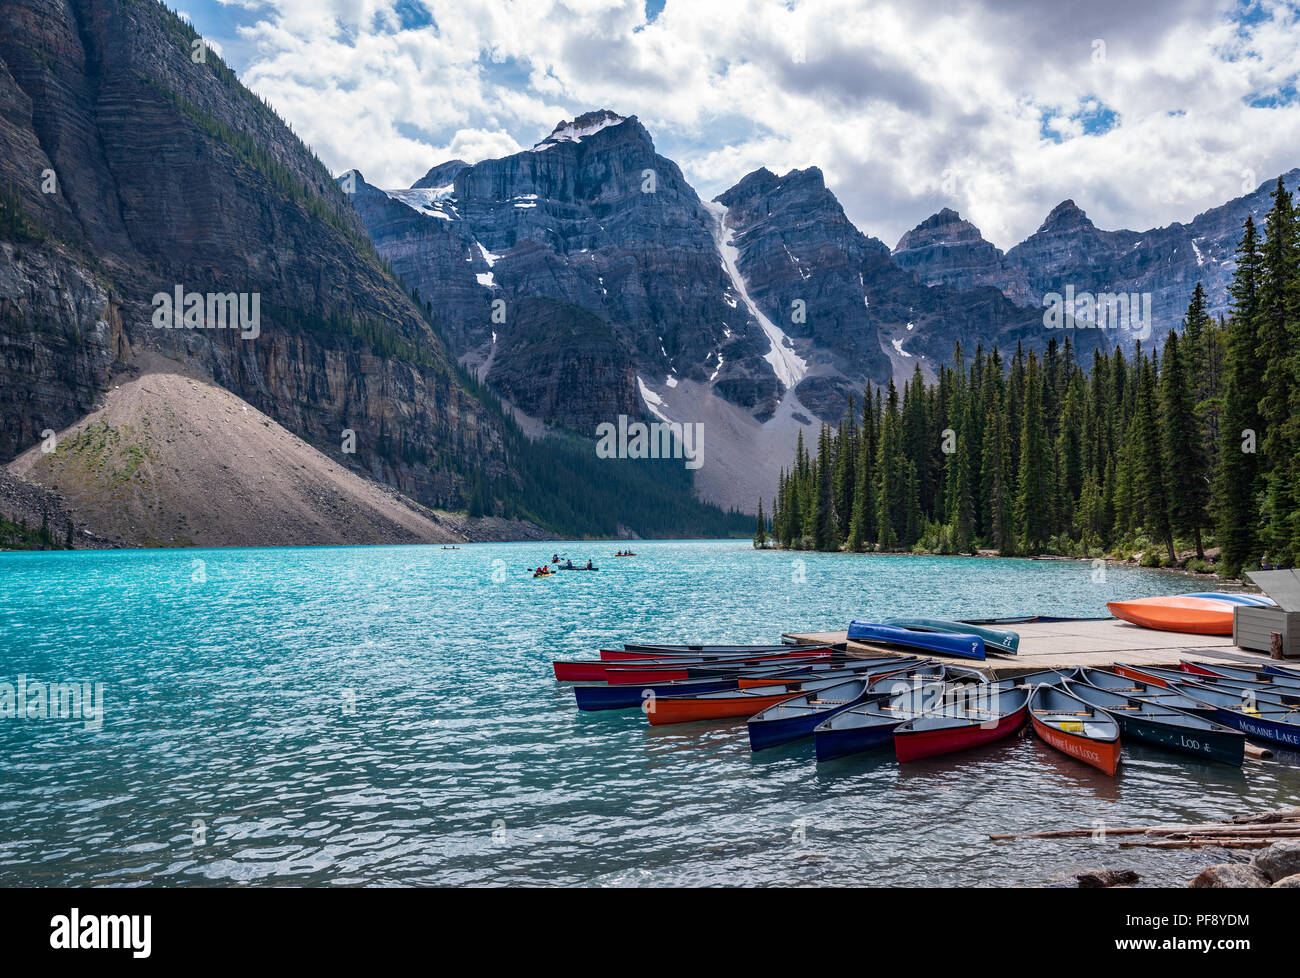 Banff, Canada--August 6, 2018.  Wide angle shot of Boaters on the aqua waters of Moraine Lake surrounded by the Ten Peaks. Stock Photo